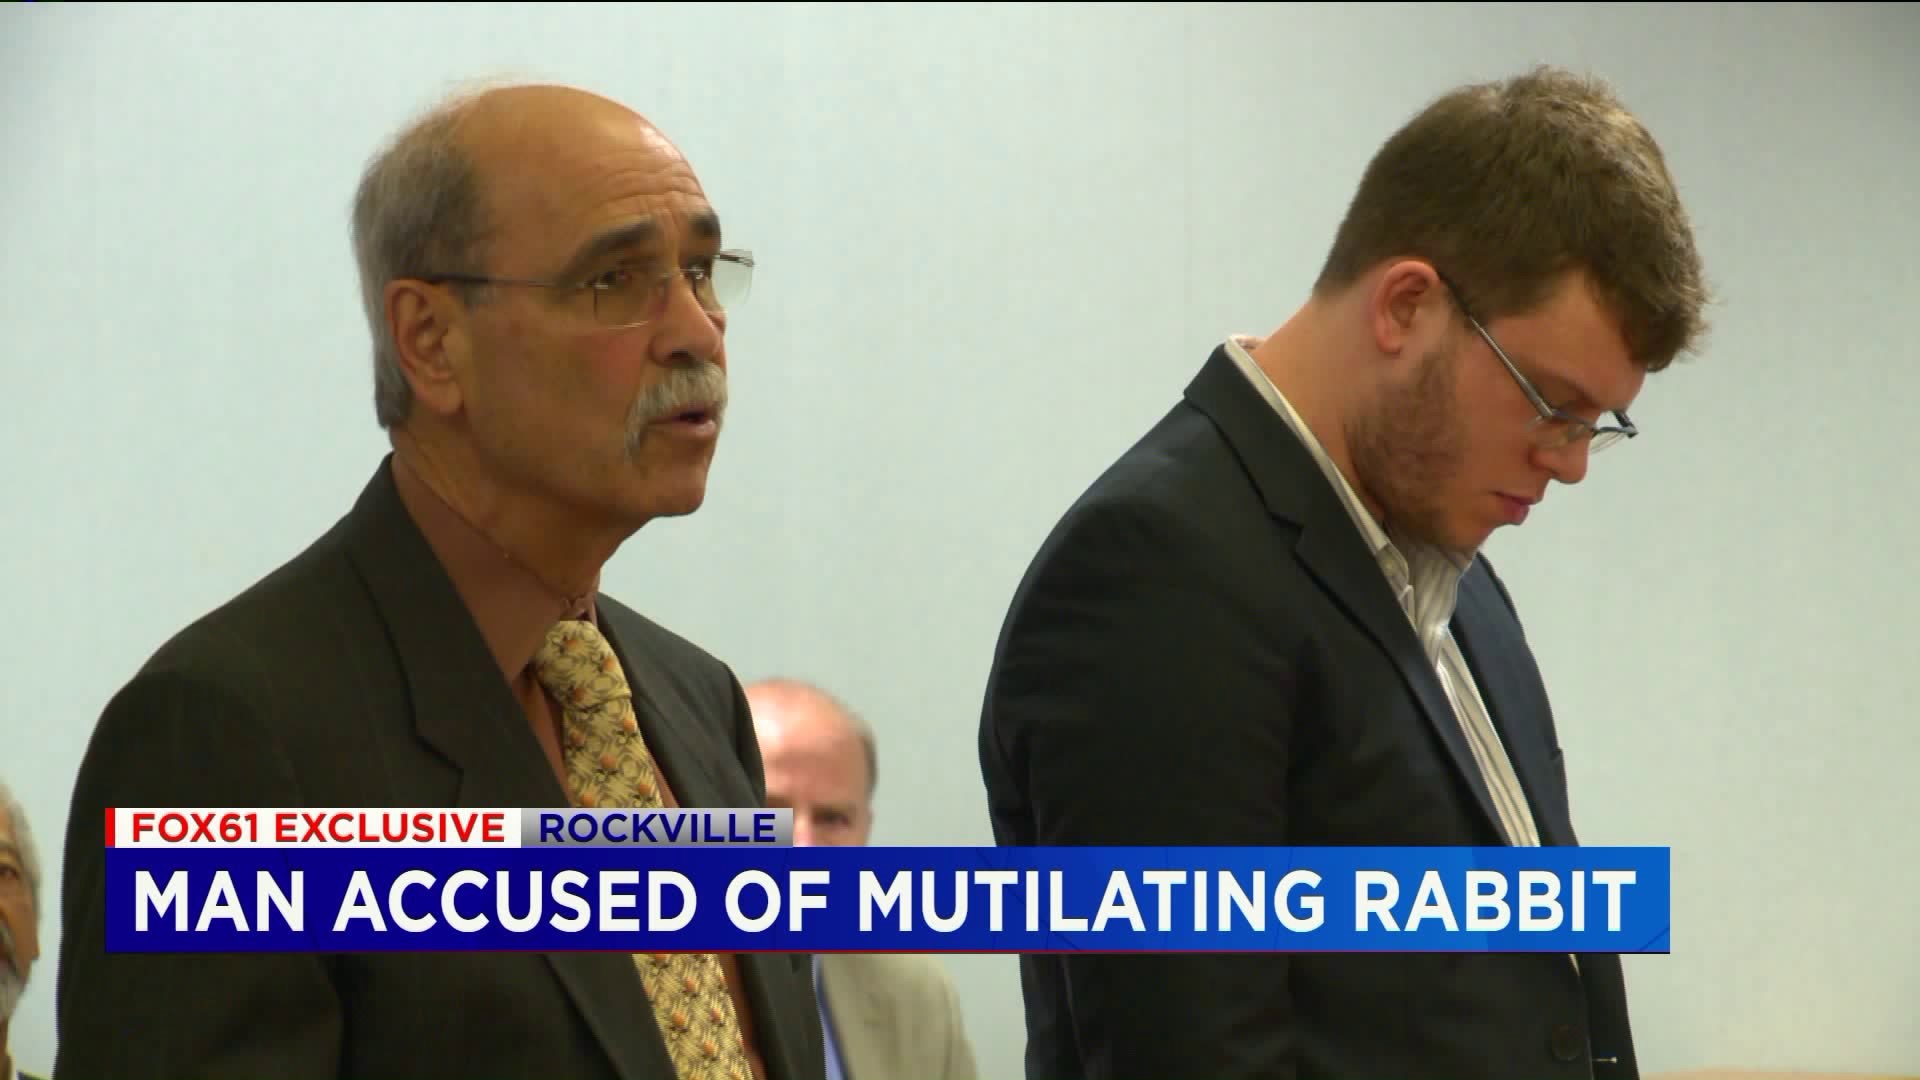 FOX61 Exclusive: New Britain man charged with animal cruelty for allegedly mutilating a rabbit while driving